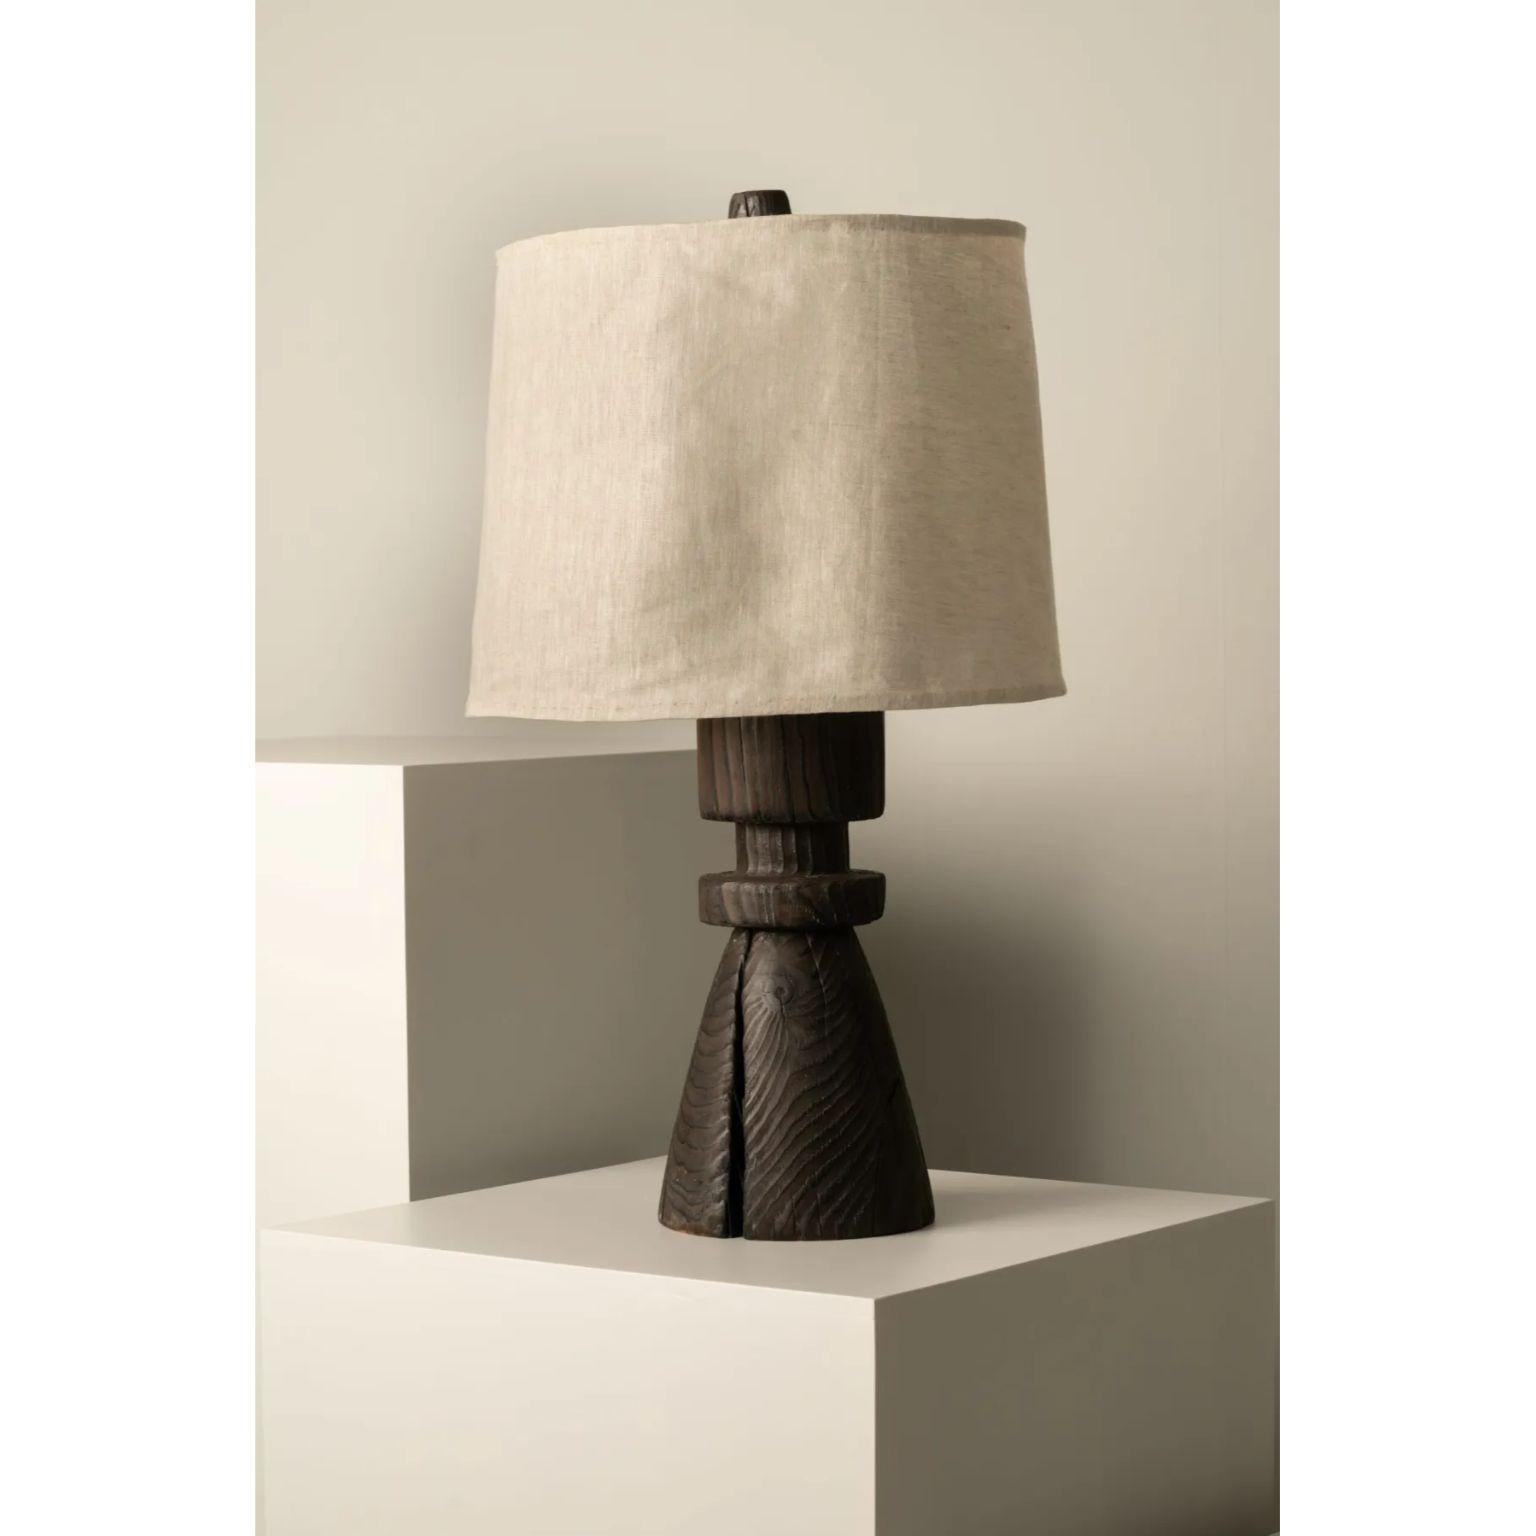 Mezquite Table Lamp by Isabel Moncada
Dimensions: Ø35.5 x H 68.5 cm.
Materials: Linen and pine wood.

When burnt using the Japanese technique Shou sugi ban, the wood grains become apparent and cracks appear randomly in the solid trunk. Hence,